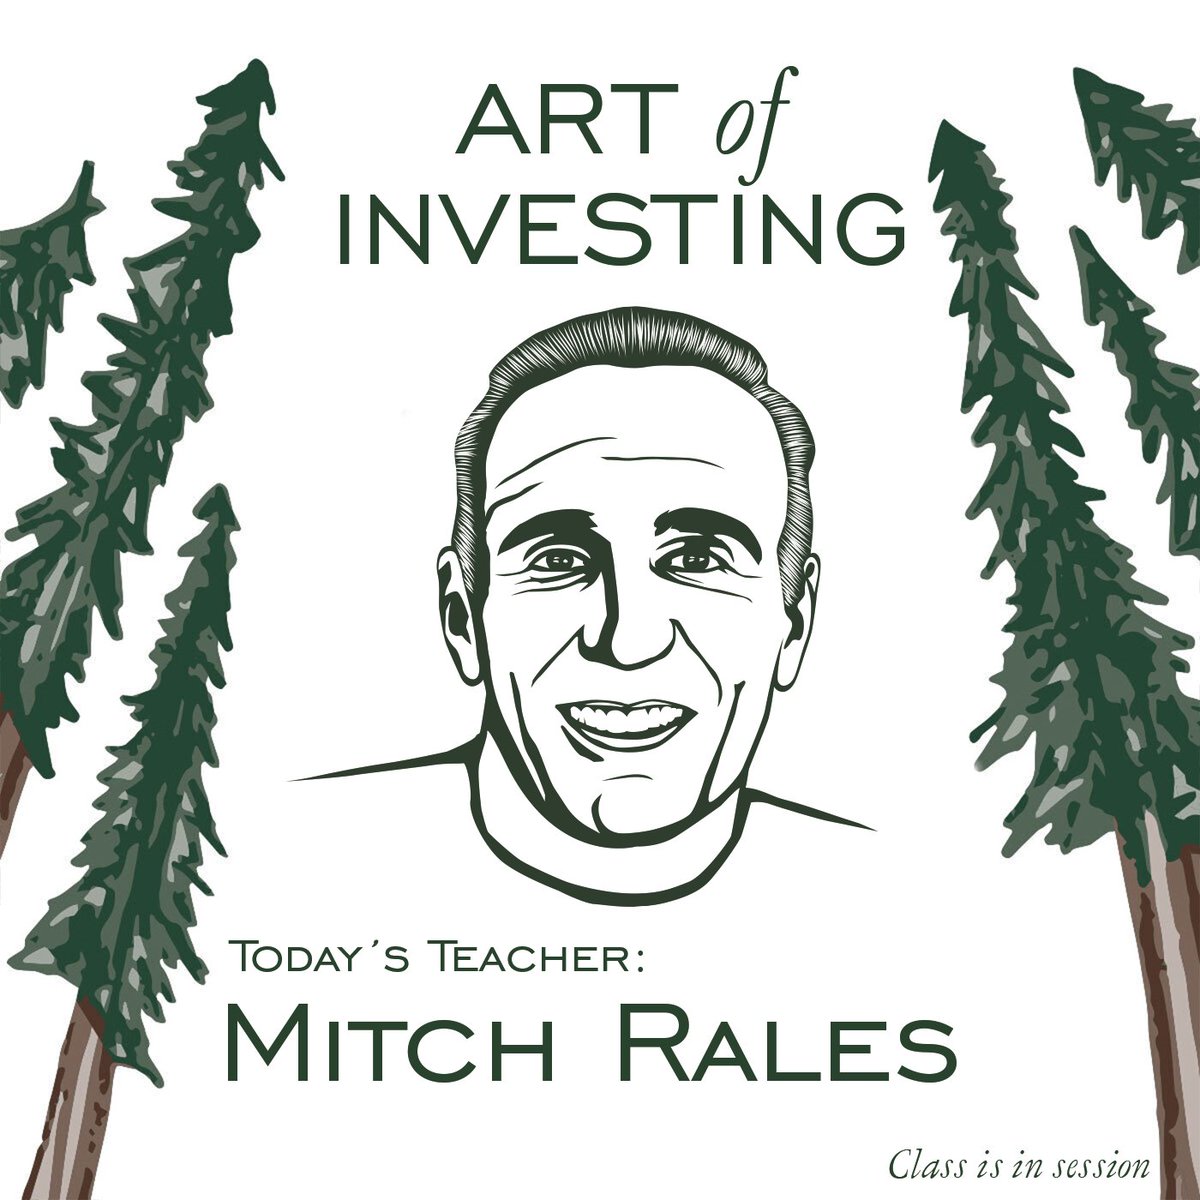 Our @artofinvest teacher today is Mitch Rales, one of the most iconic business builders and philanthropists of our time. Having cofounded @DanaherCorp 40 years ago alongside his brother and best friend, Steve, the Rales boys have strung together a track record of compounding that